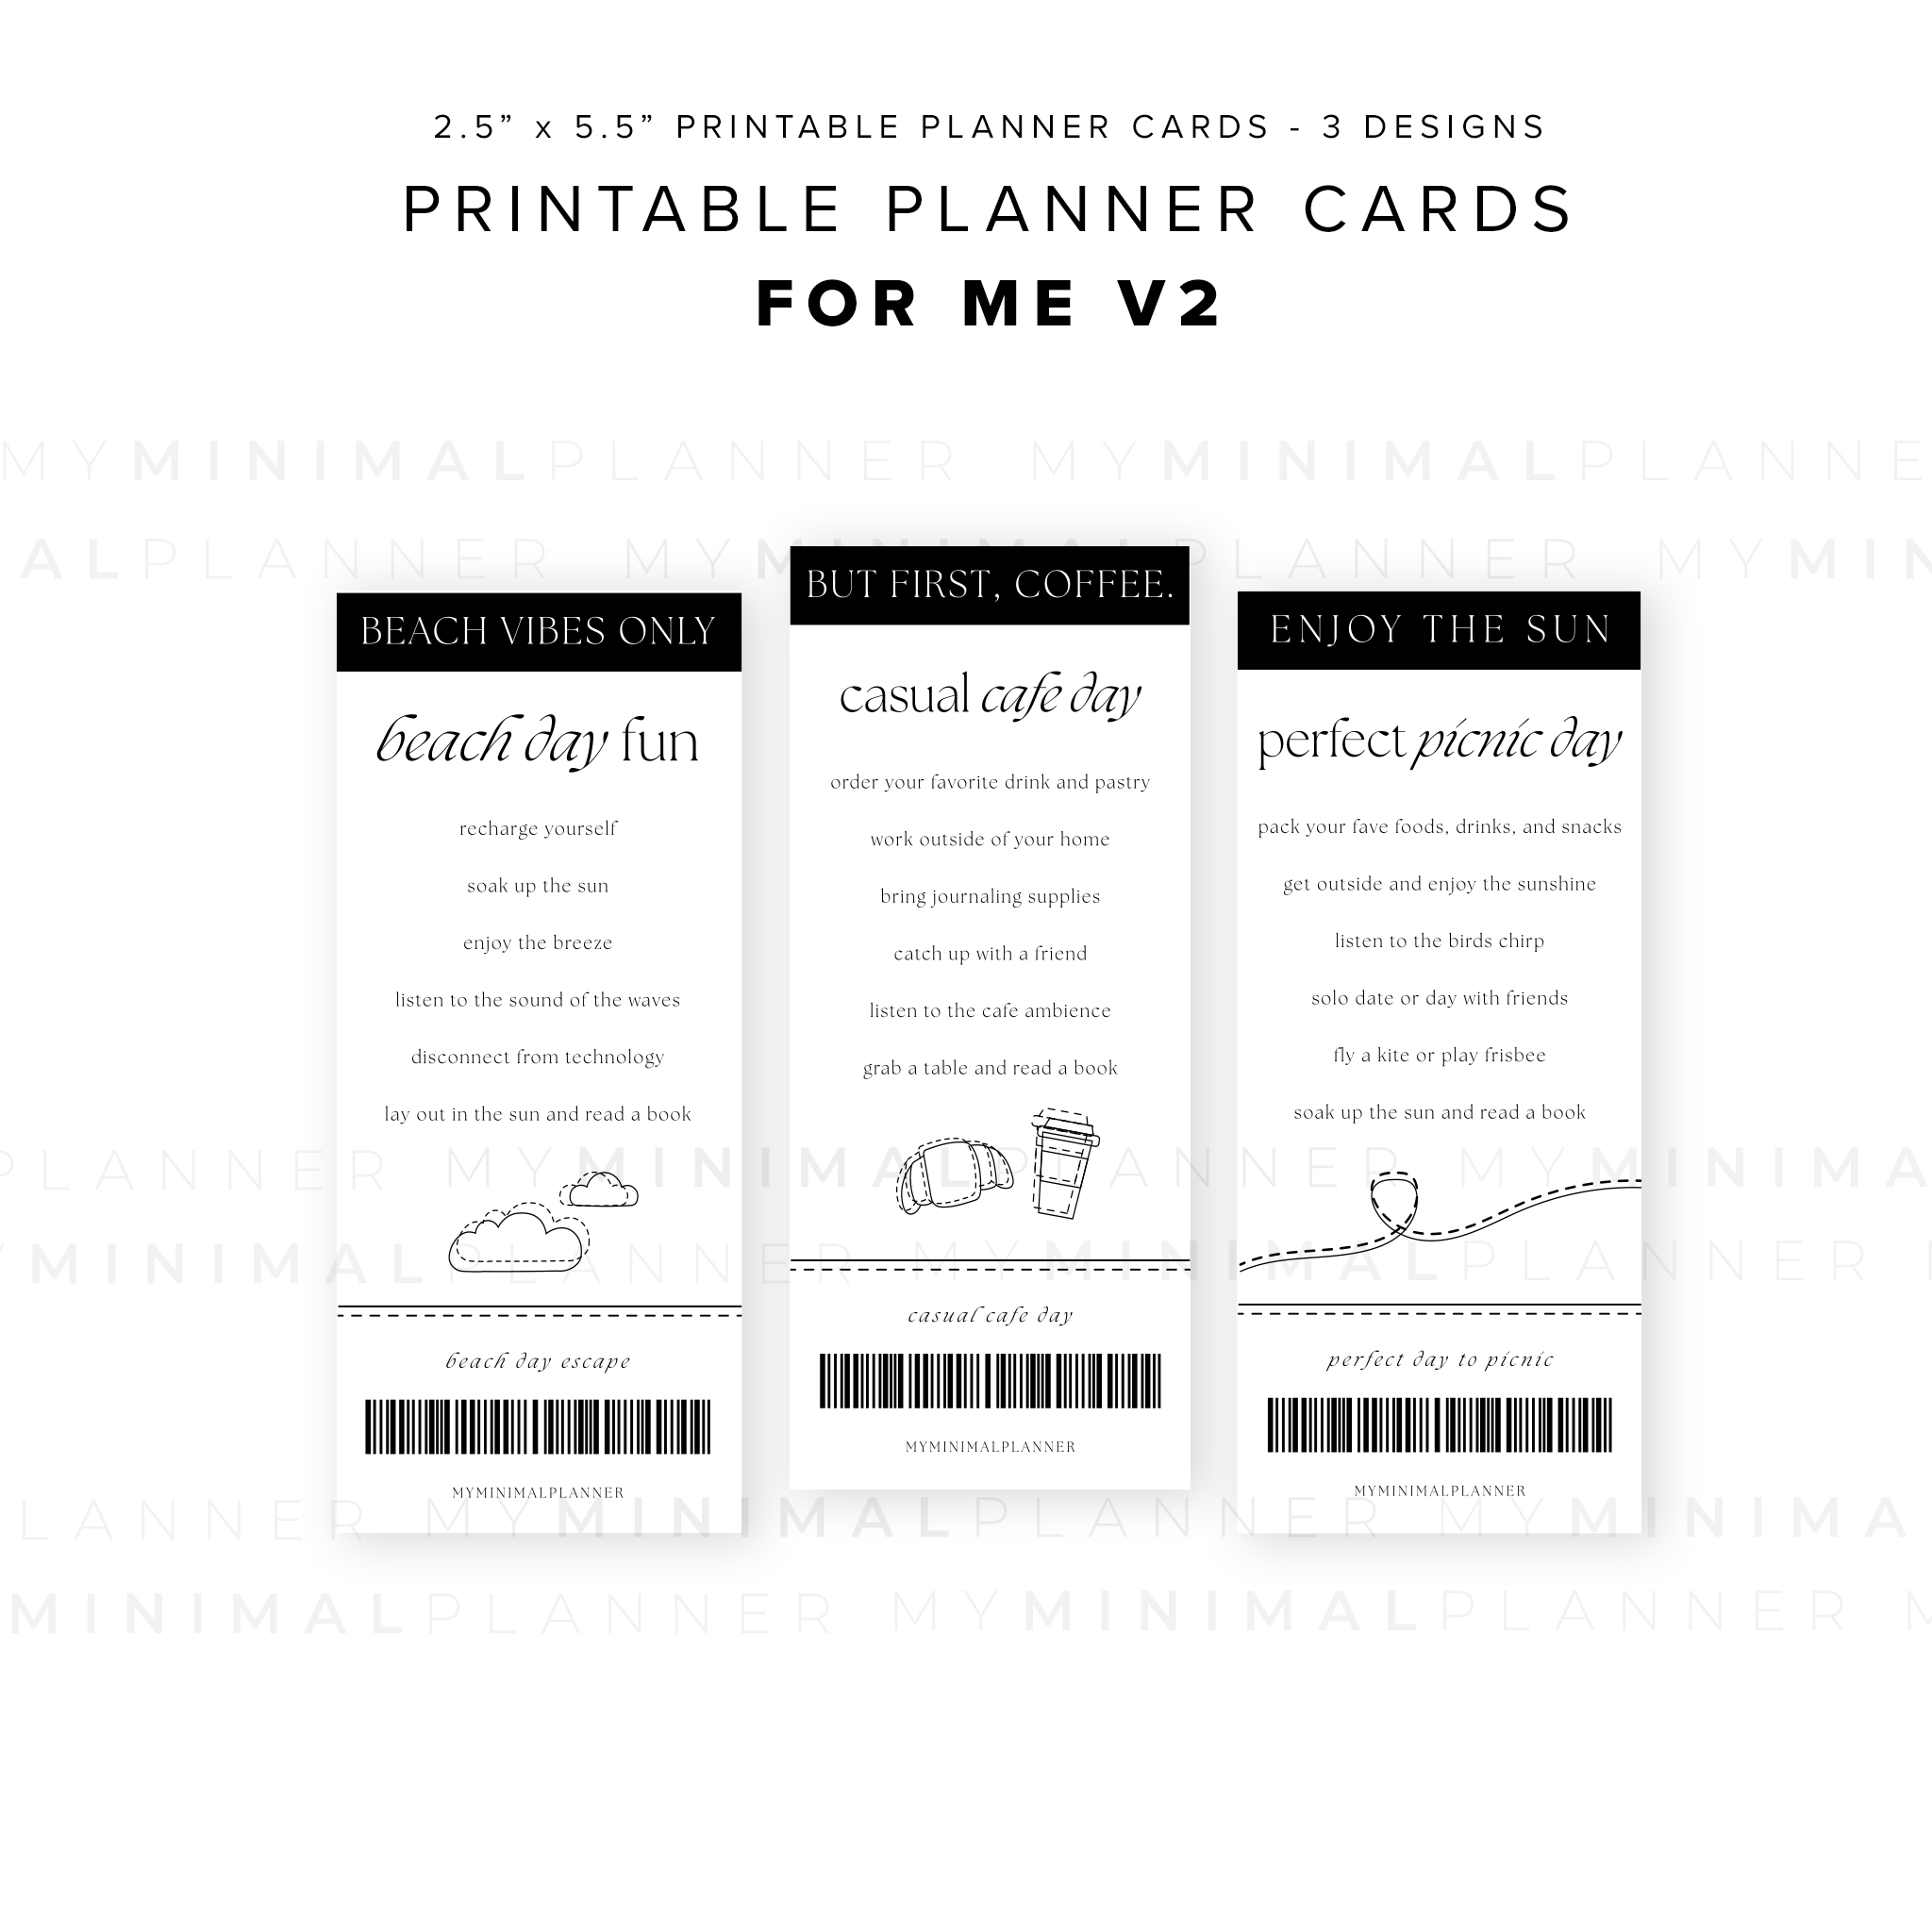 PPC28 - For ME 2 - Printable Planner Cards